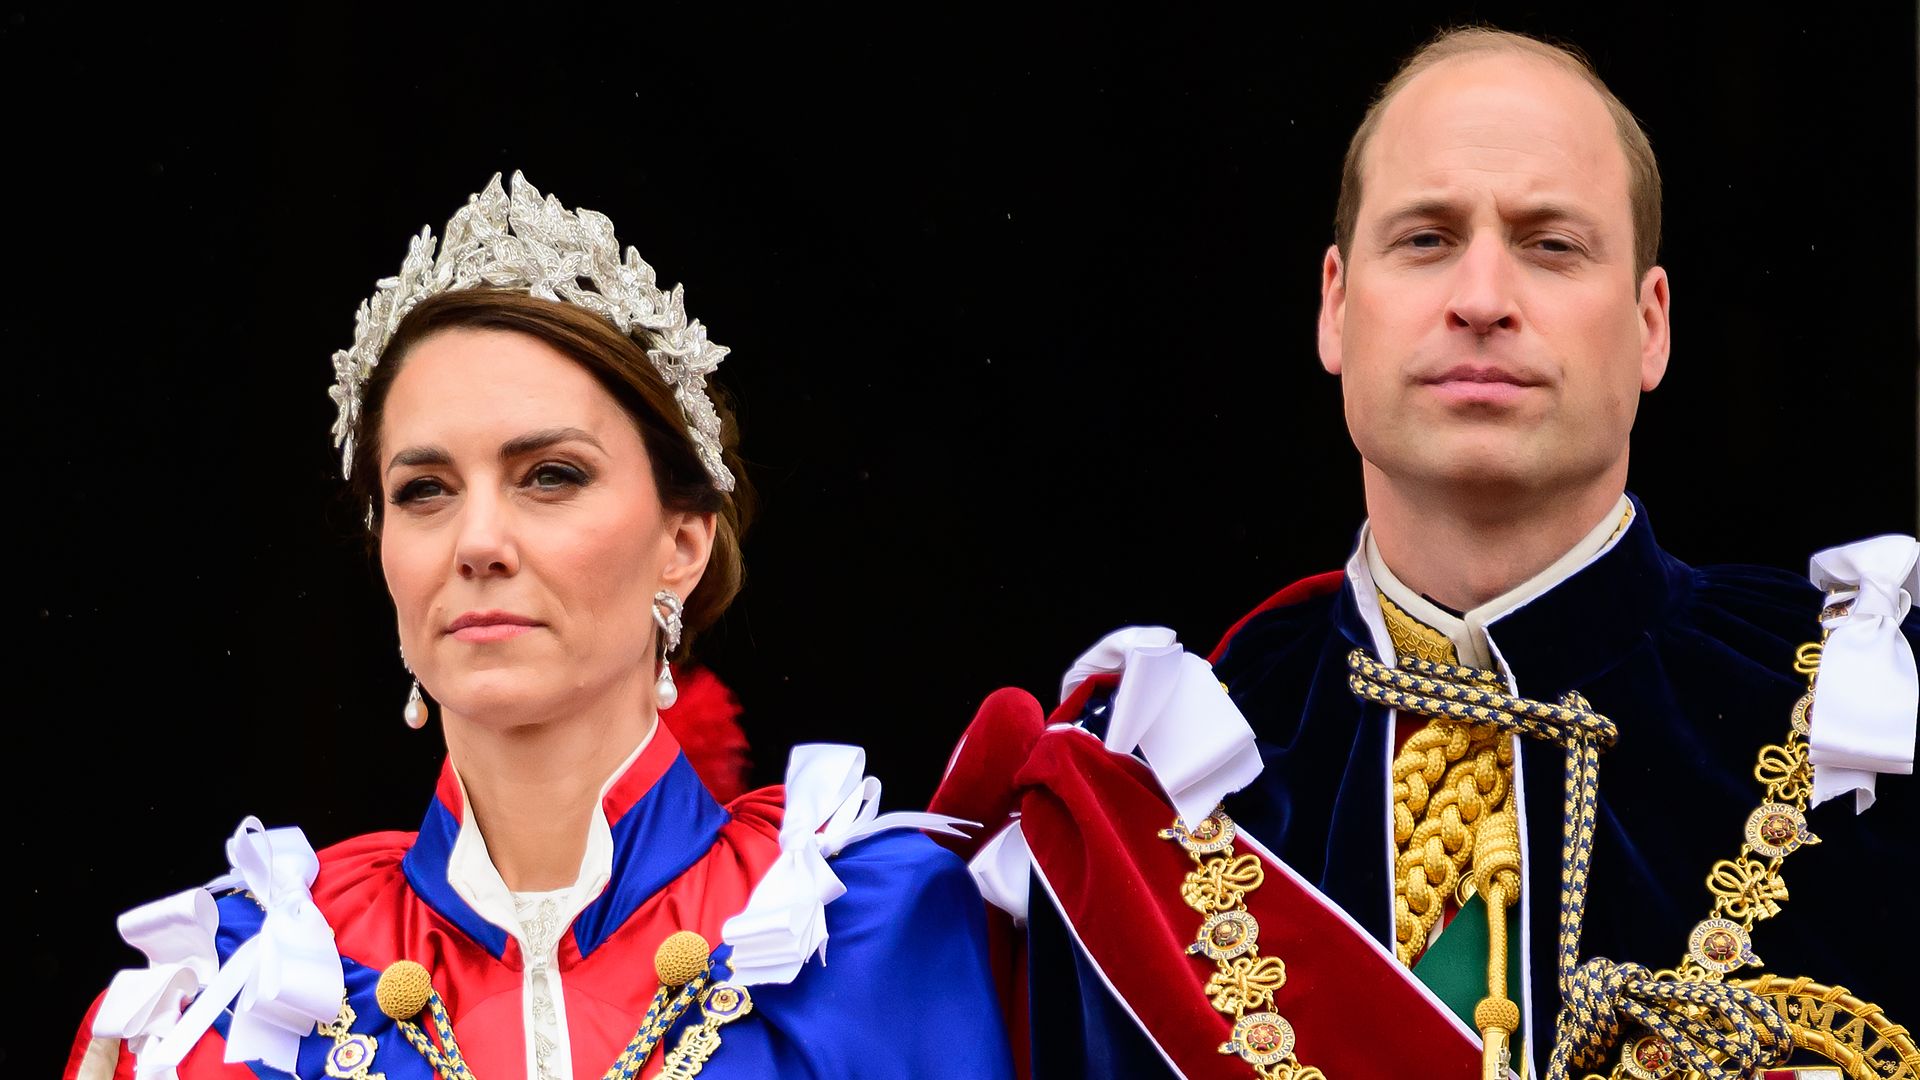 Kate Middleton and Prince William in royal regalia